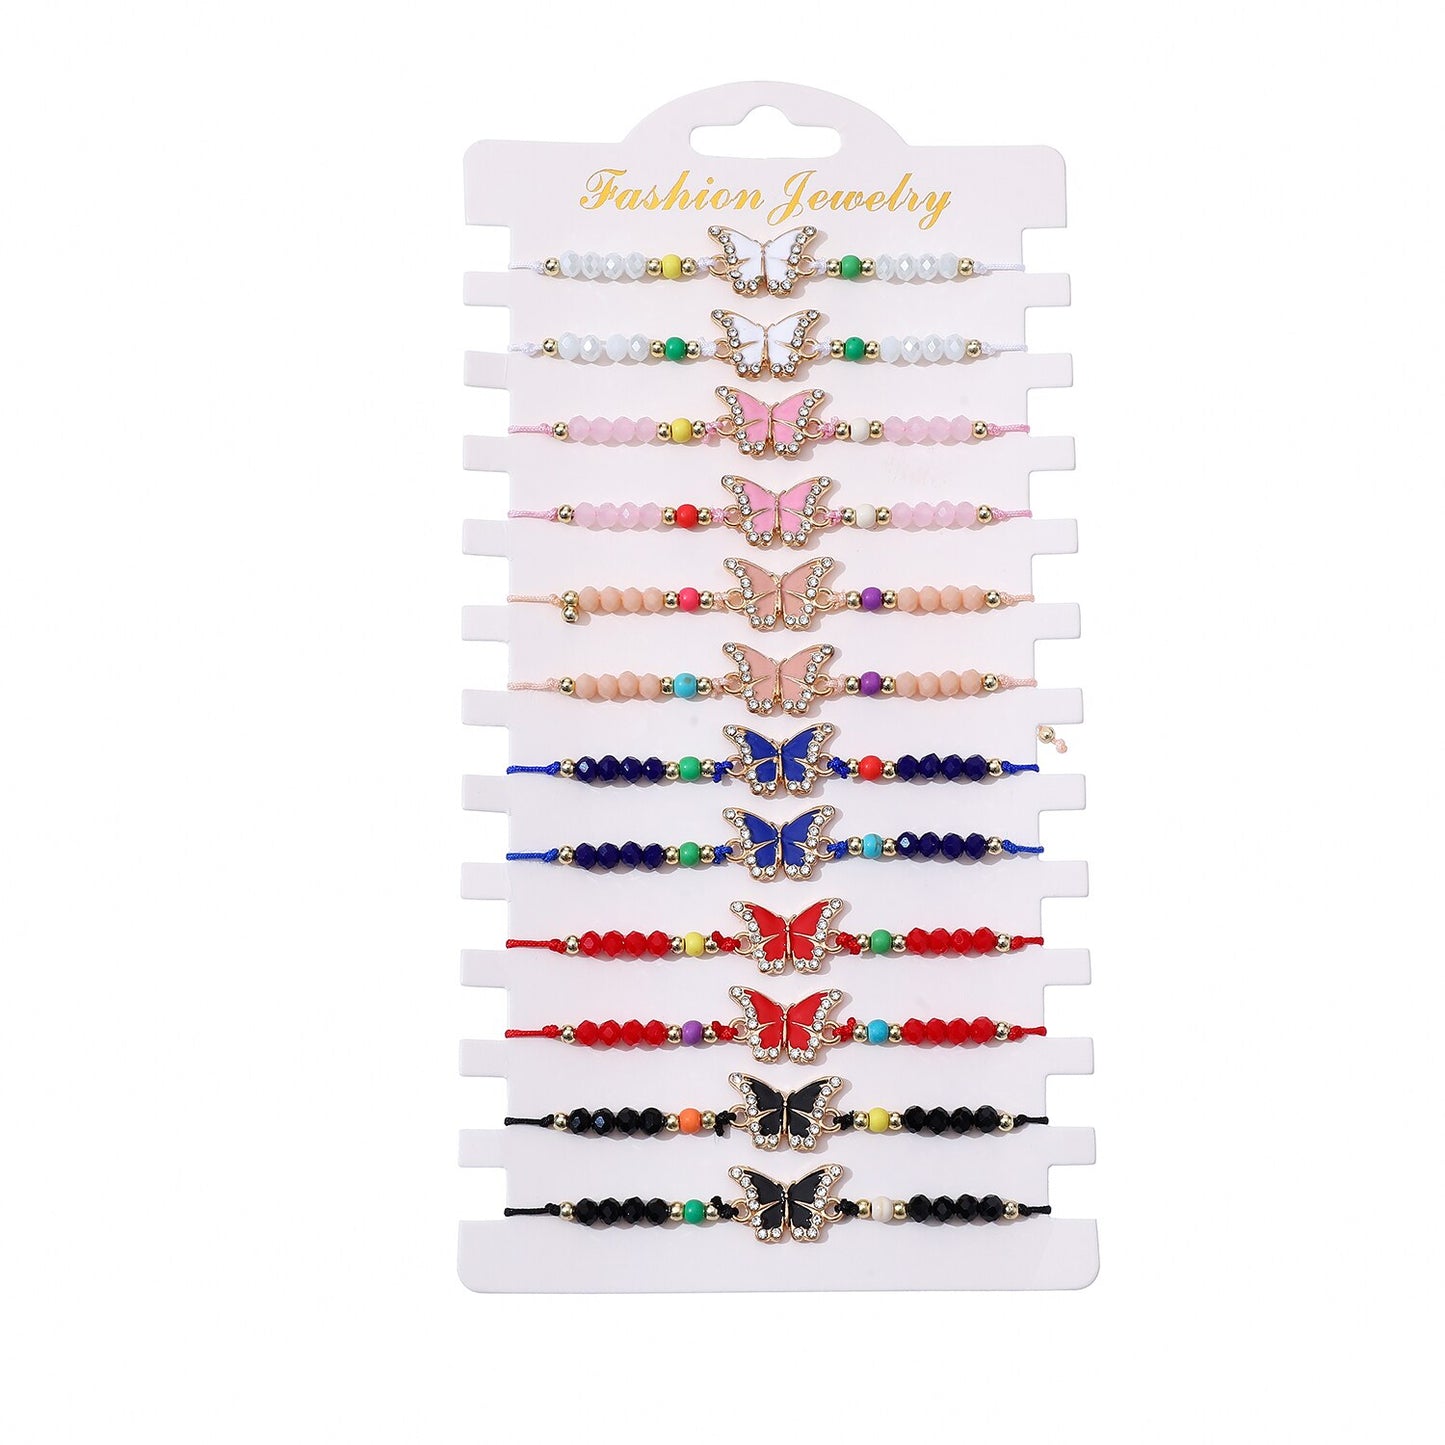 12pcs/lot Colorful Crystal Rhinestone Beads Butterfly Pendant Charm Bracelet for Girls Adjustable Anklet Kids Jewelry Wholesale